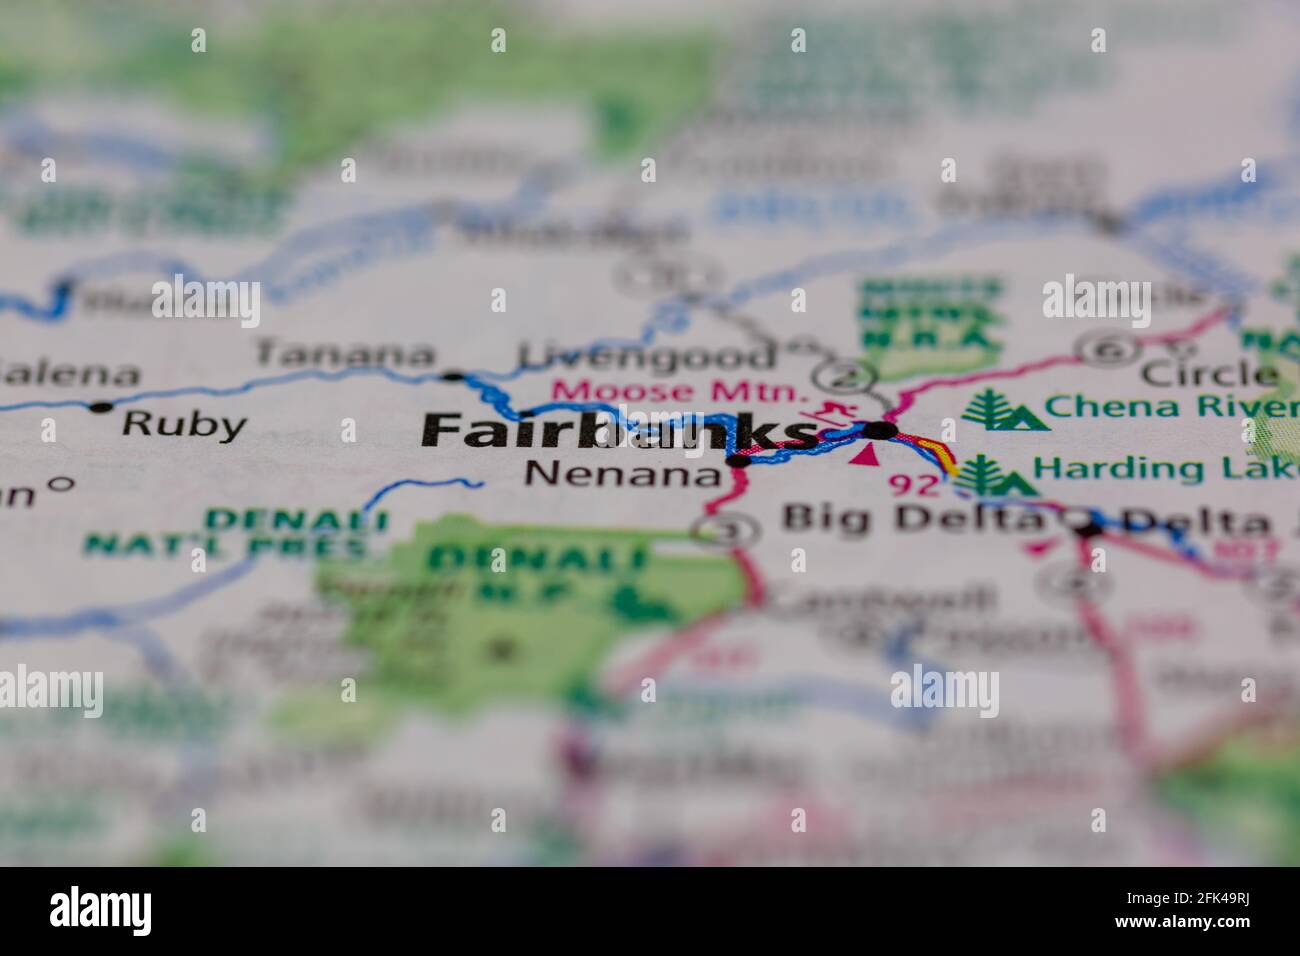 Fairbanks Alaska USA shown on a geography map or road map Stock Photo